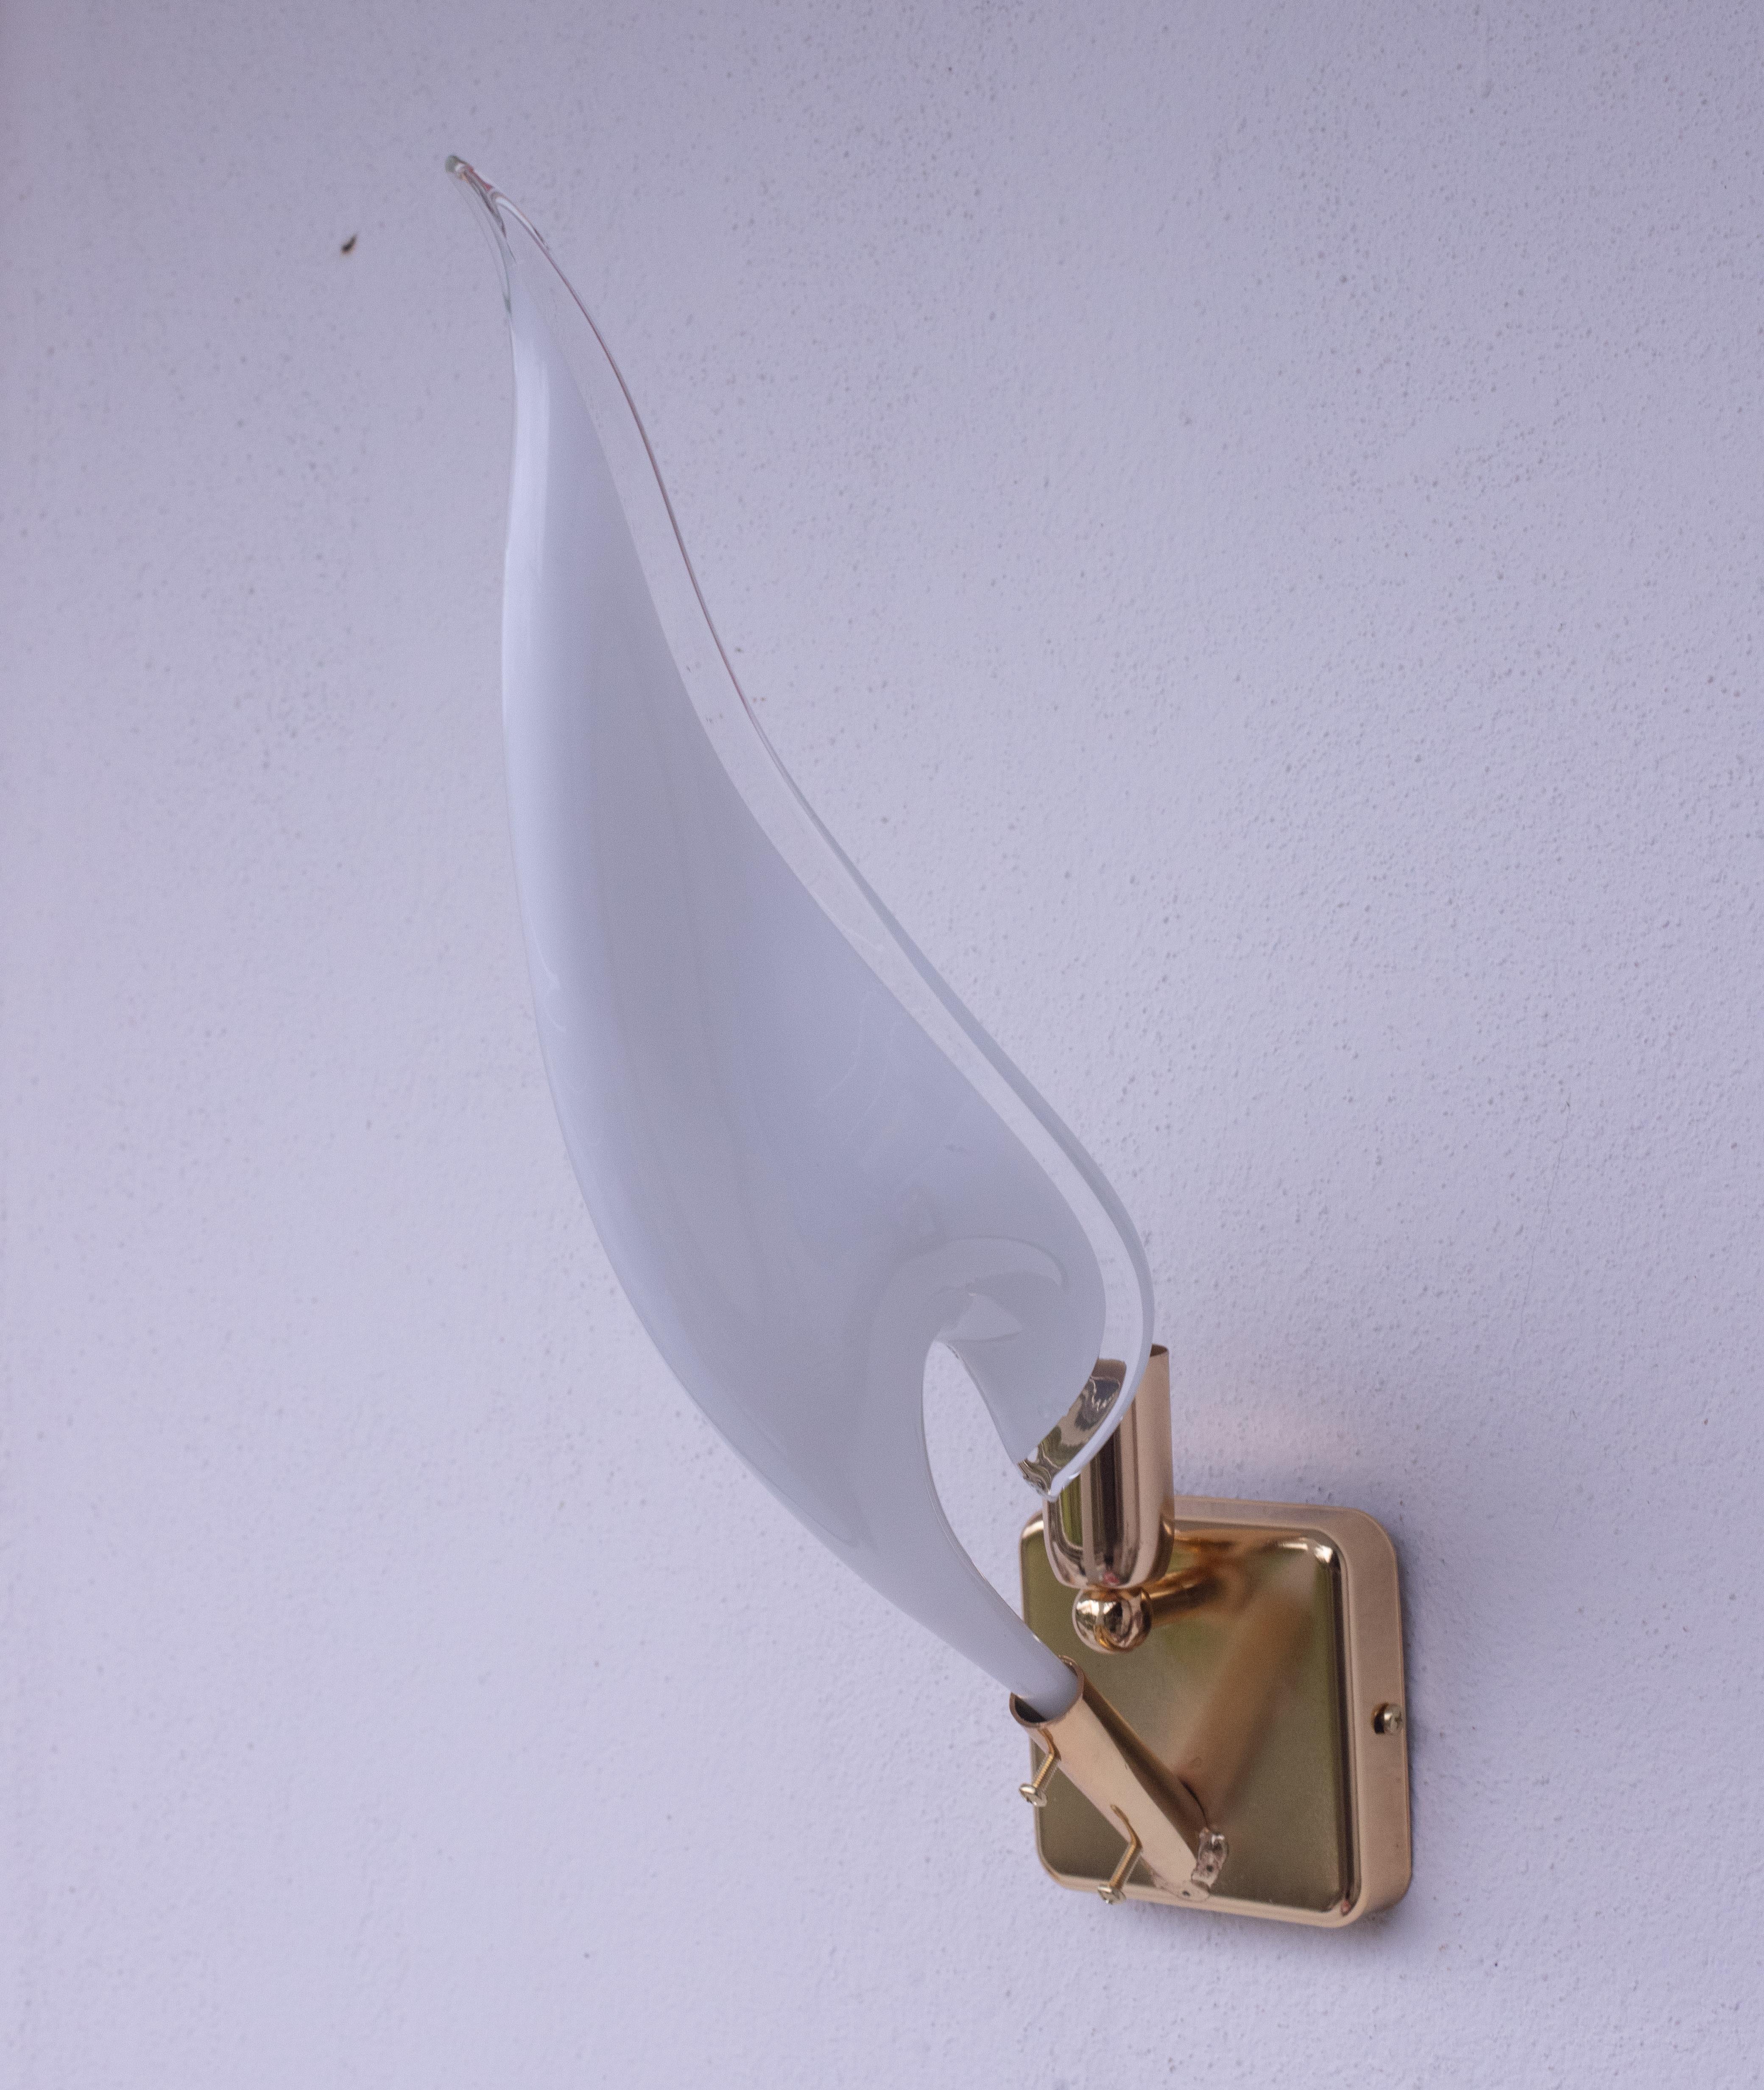 Set of 4 Murano Wall Light by Franco Luce, 1970s For Sale 3